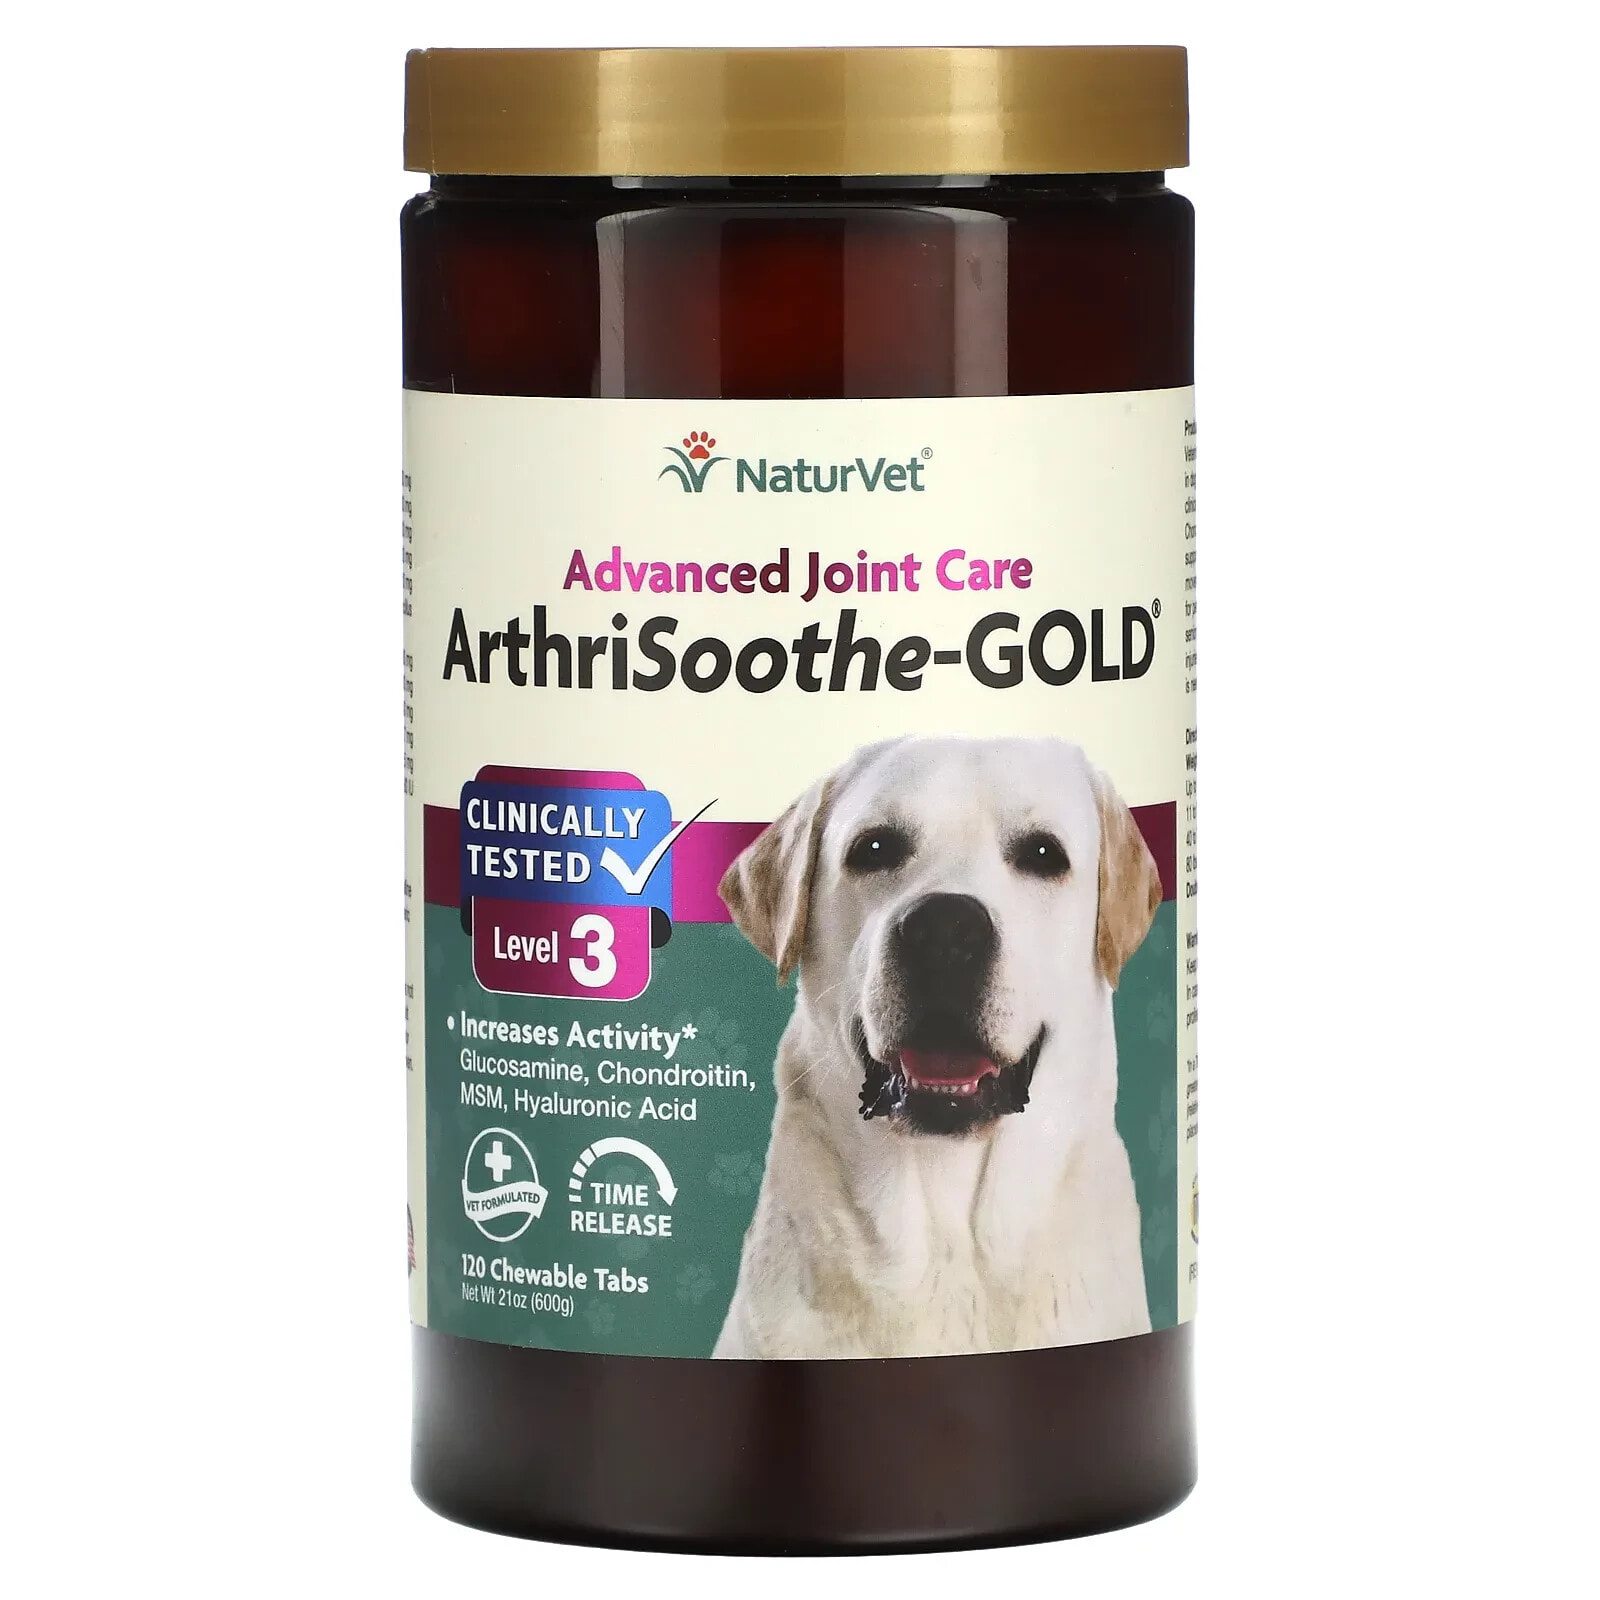 ArthriSoothe-GOLD, Advanced Joint Care, For Dogs & Cats, Level 3, 120 Chewable Tabs